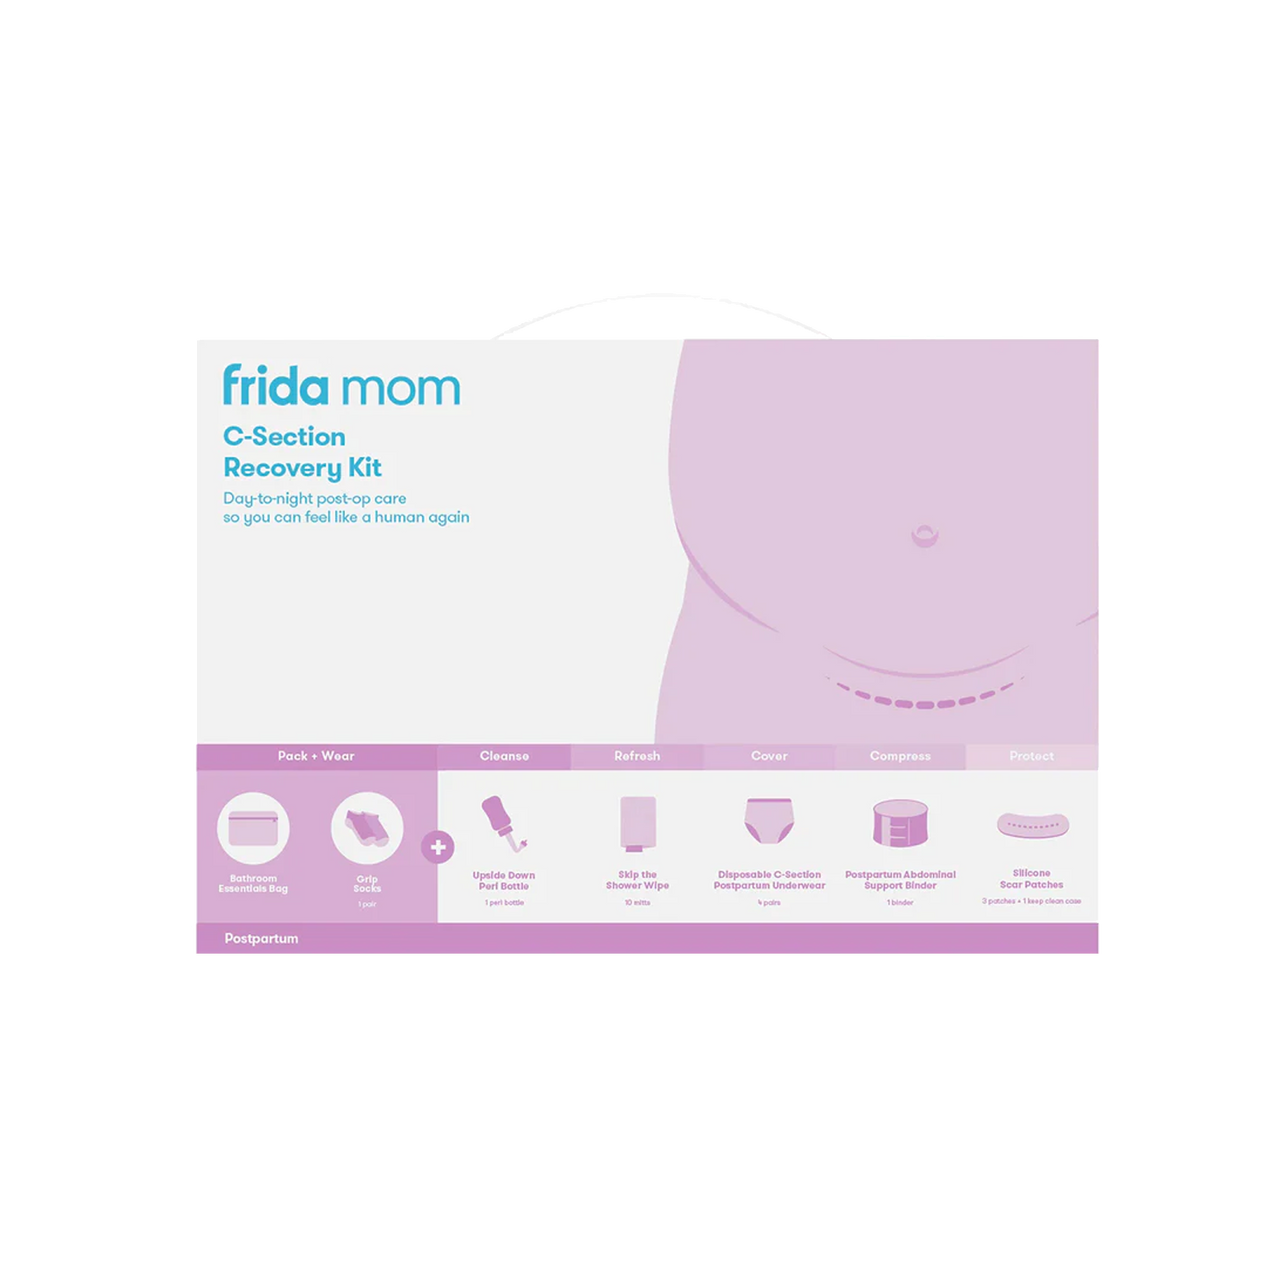 FRIDA MOM C-Section Recovery Kit